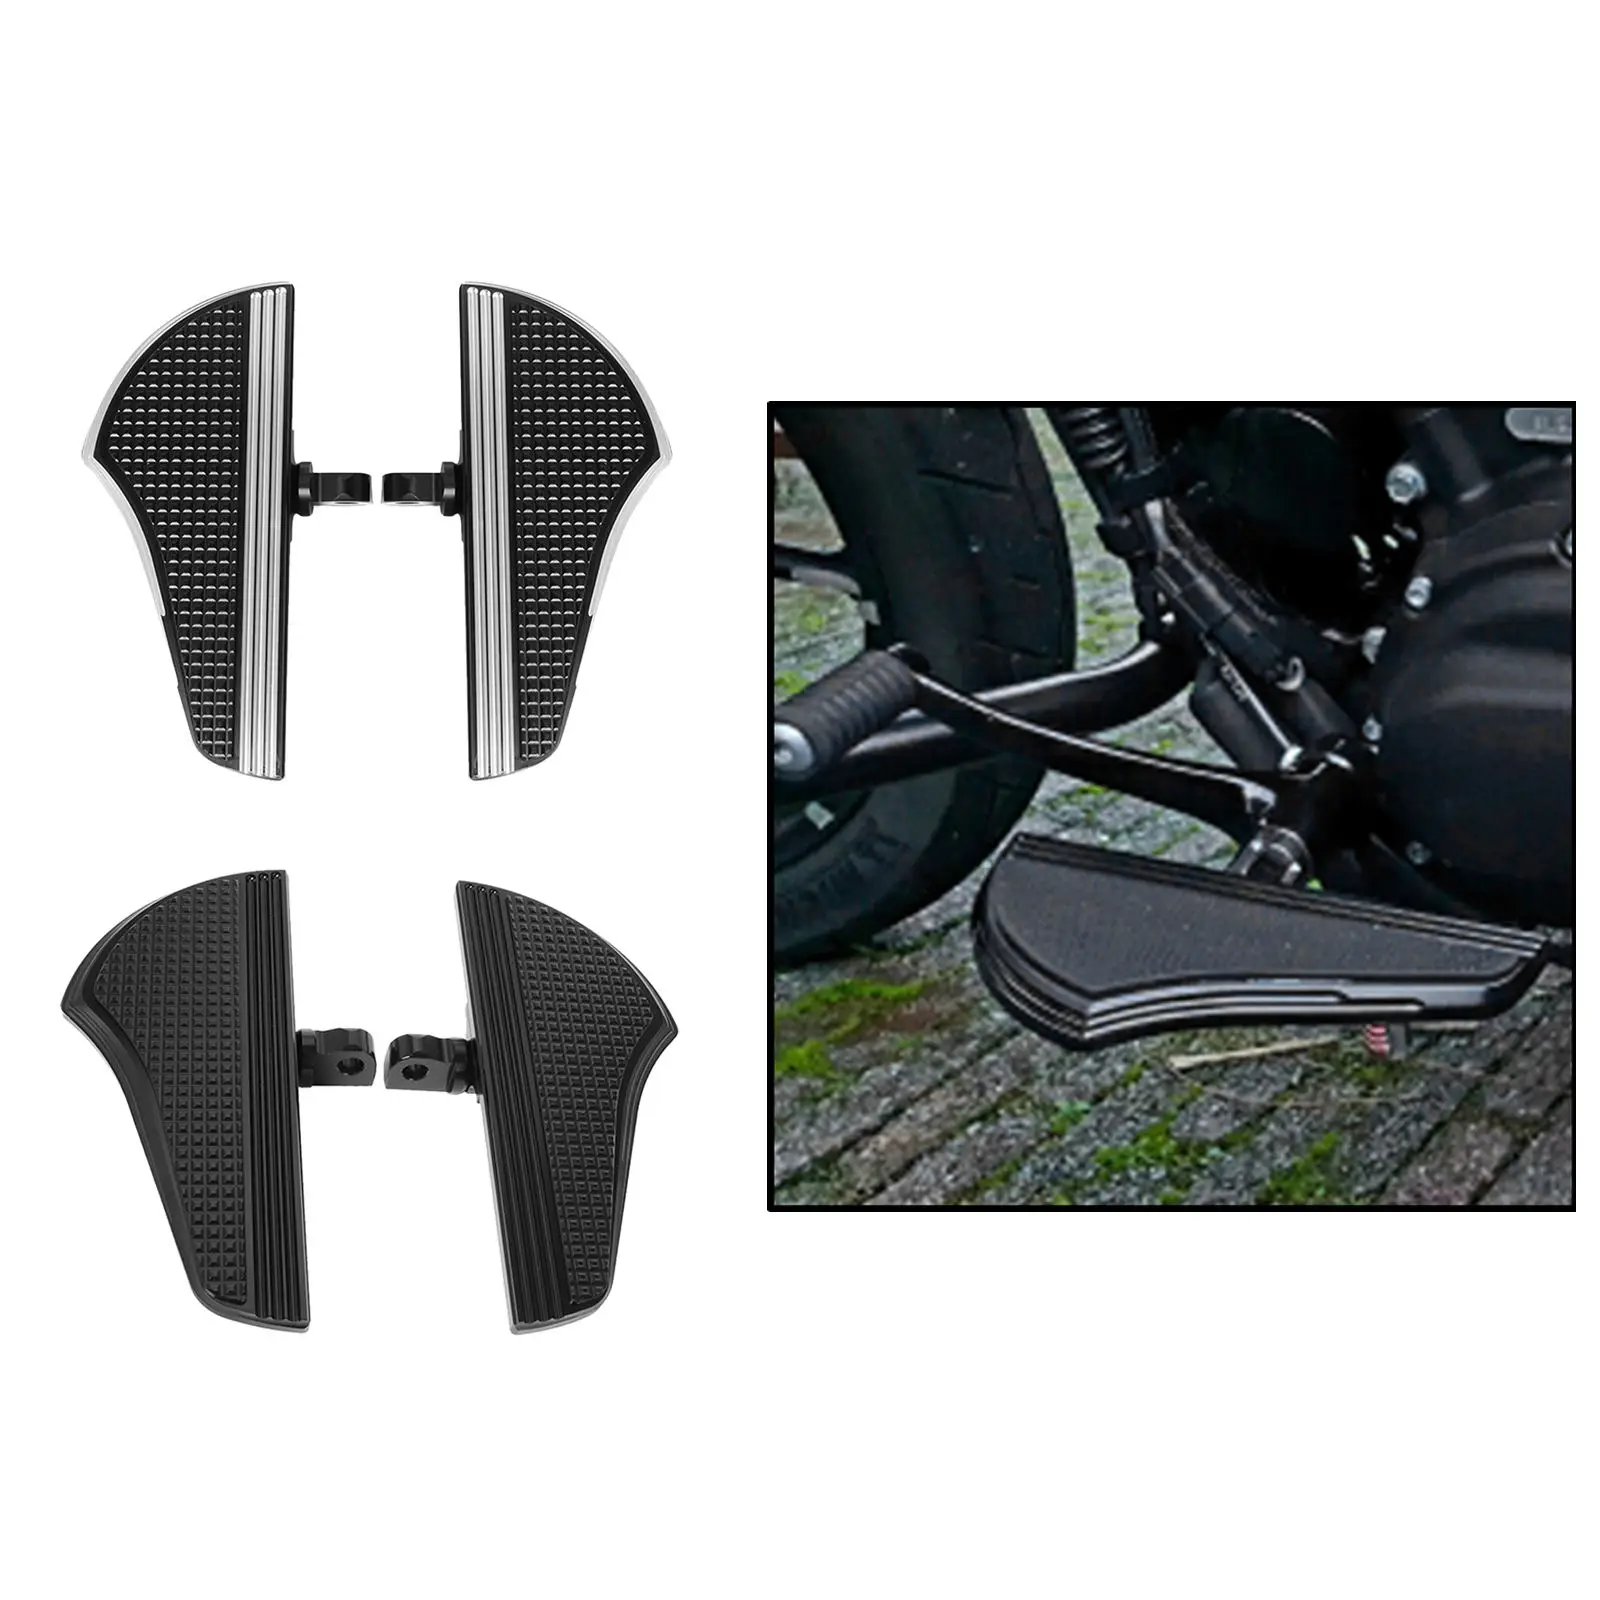 2pcs Motorcycles Passenger Rear Footboard Mount Footboard Foot Rest  Accessories for Harley XL for Touring Models